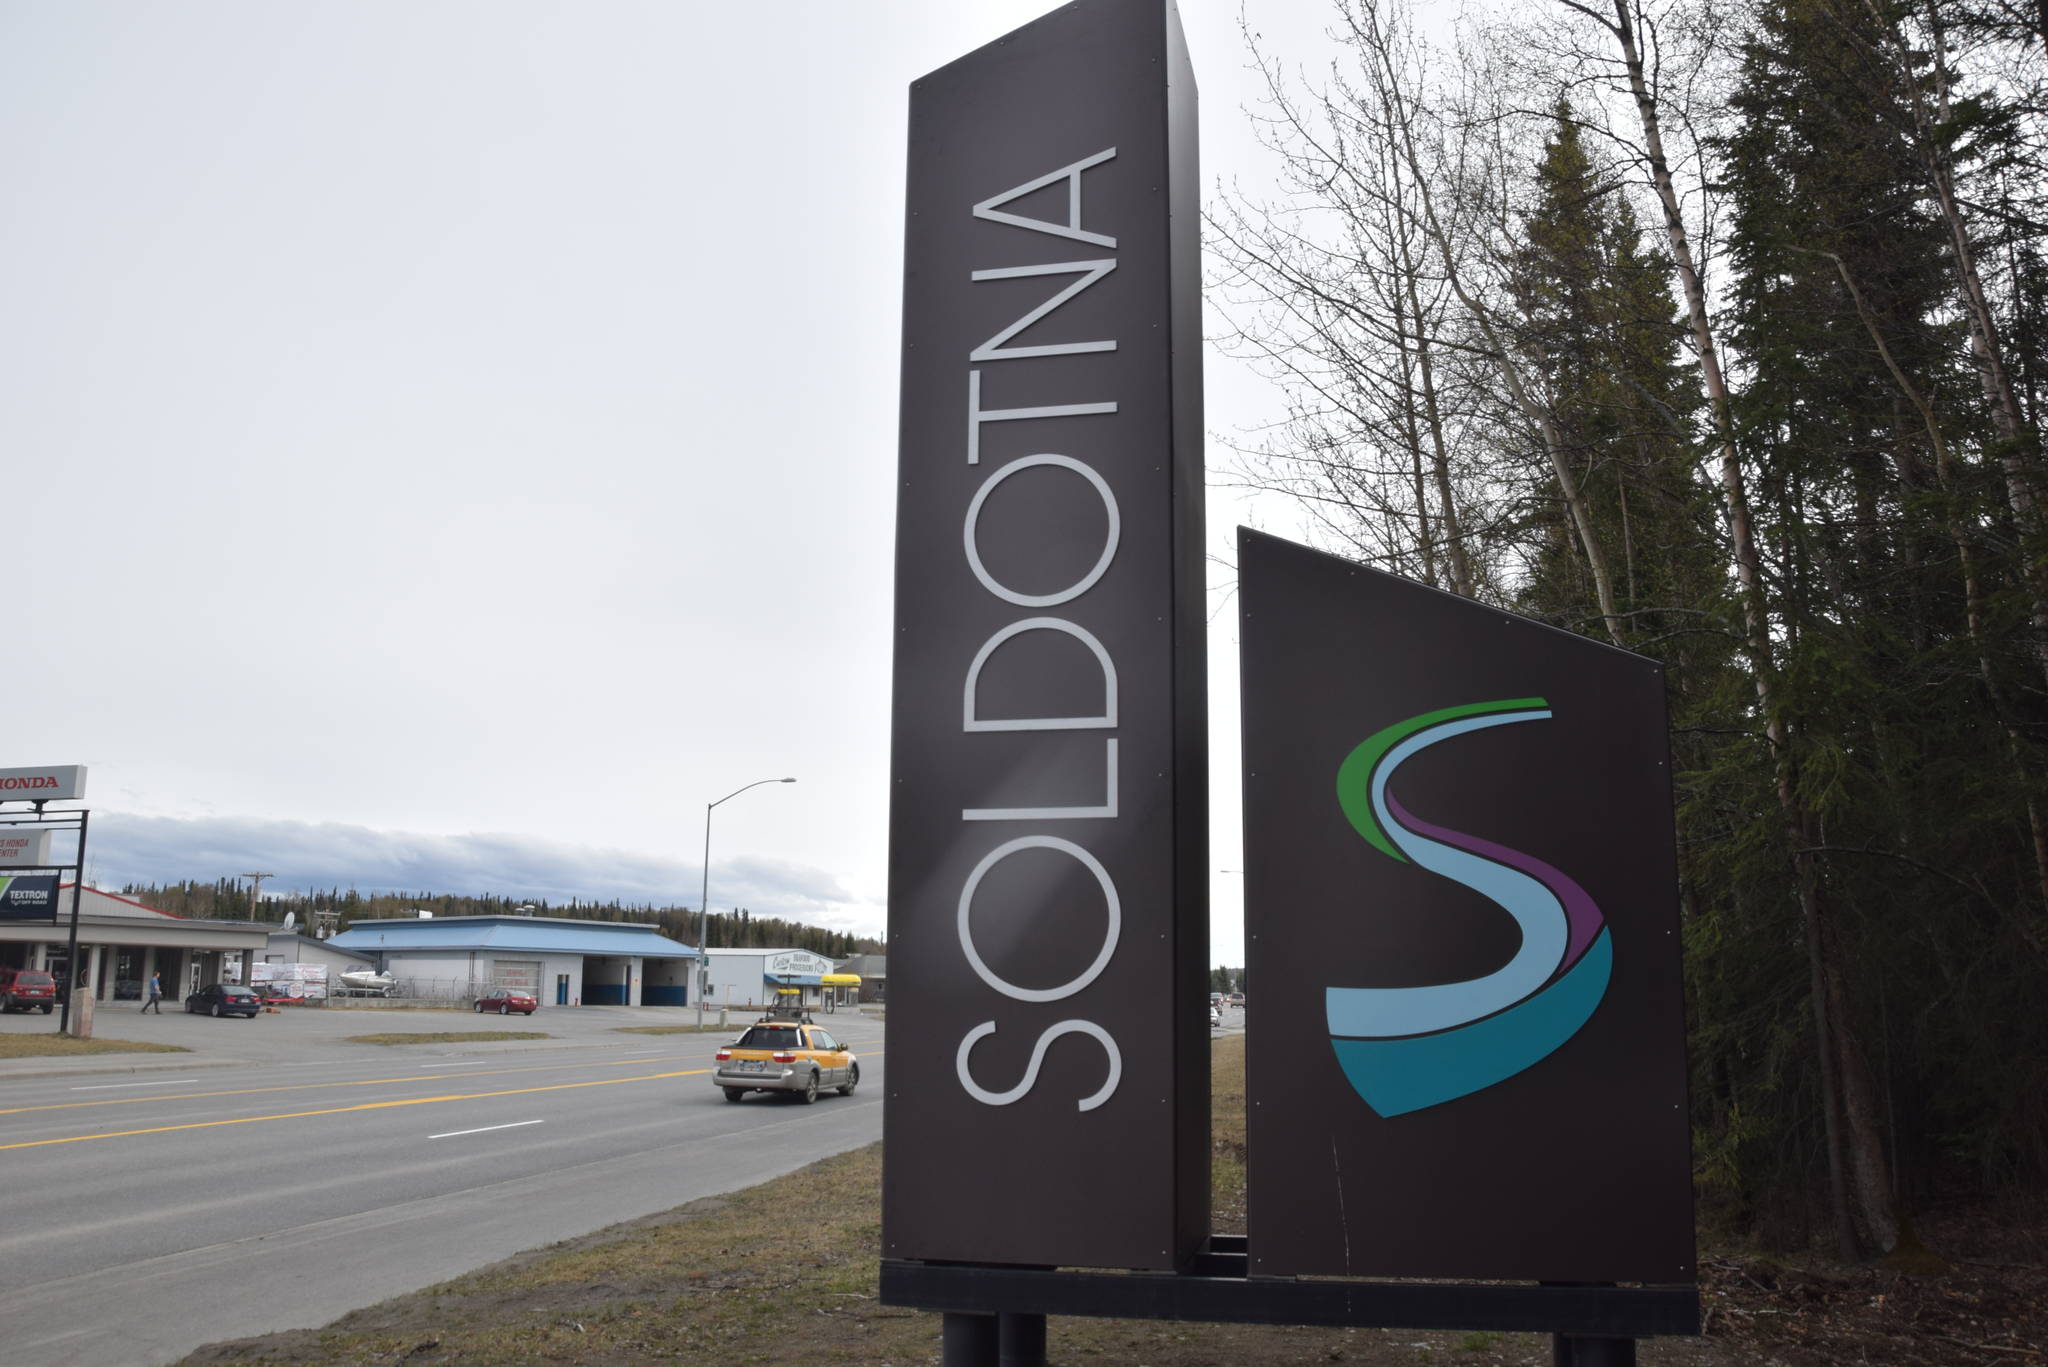 A new sign welcoming people to the City of Soldotna is photographed on May 1, 2019, in Soldotna, Alaska. (Photo by Brian Mazurek/Peninsula Clarion)